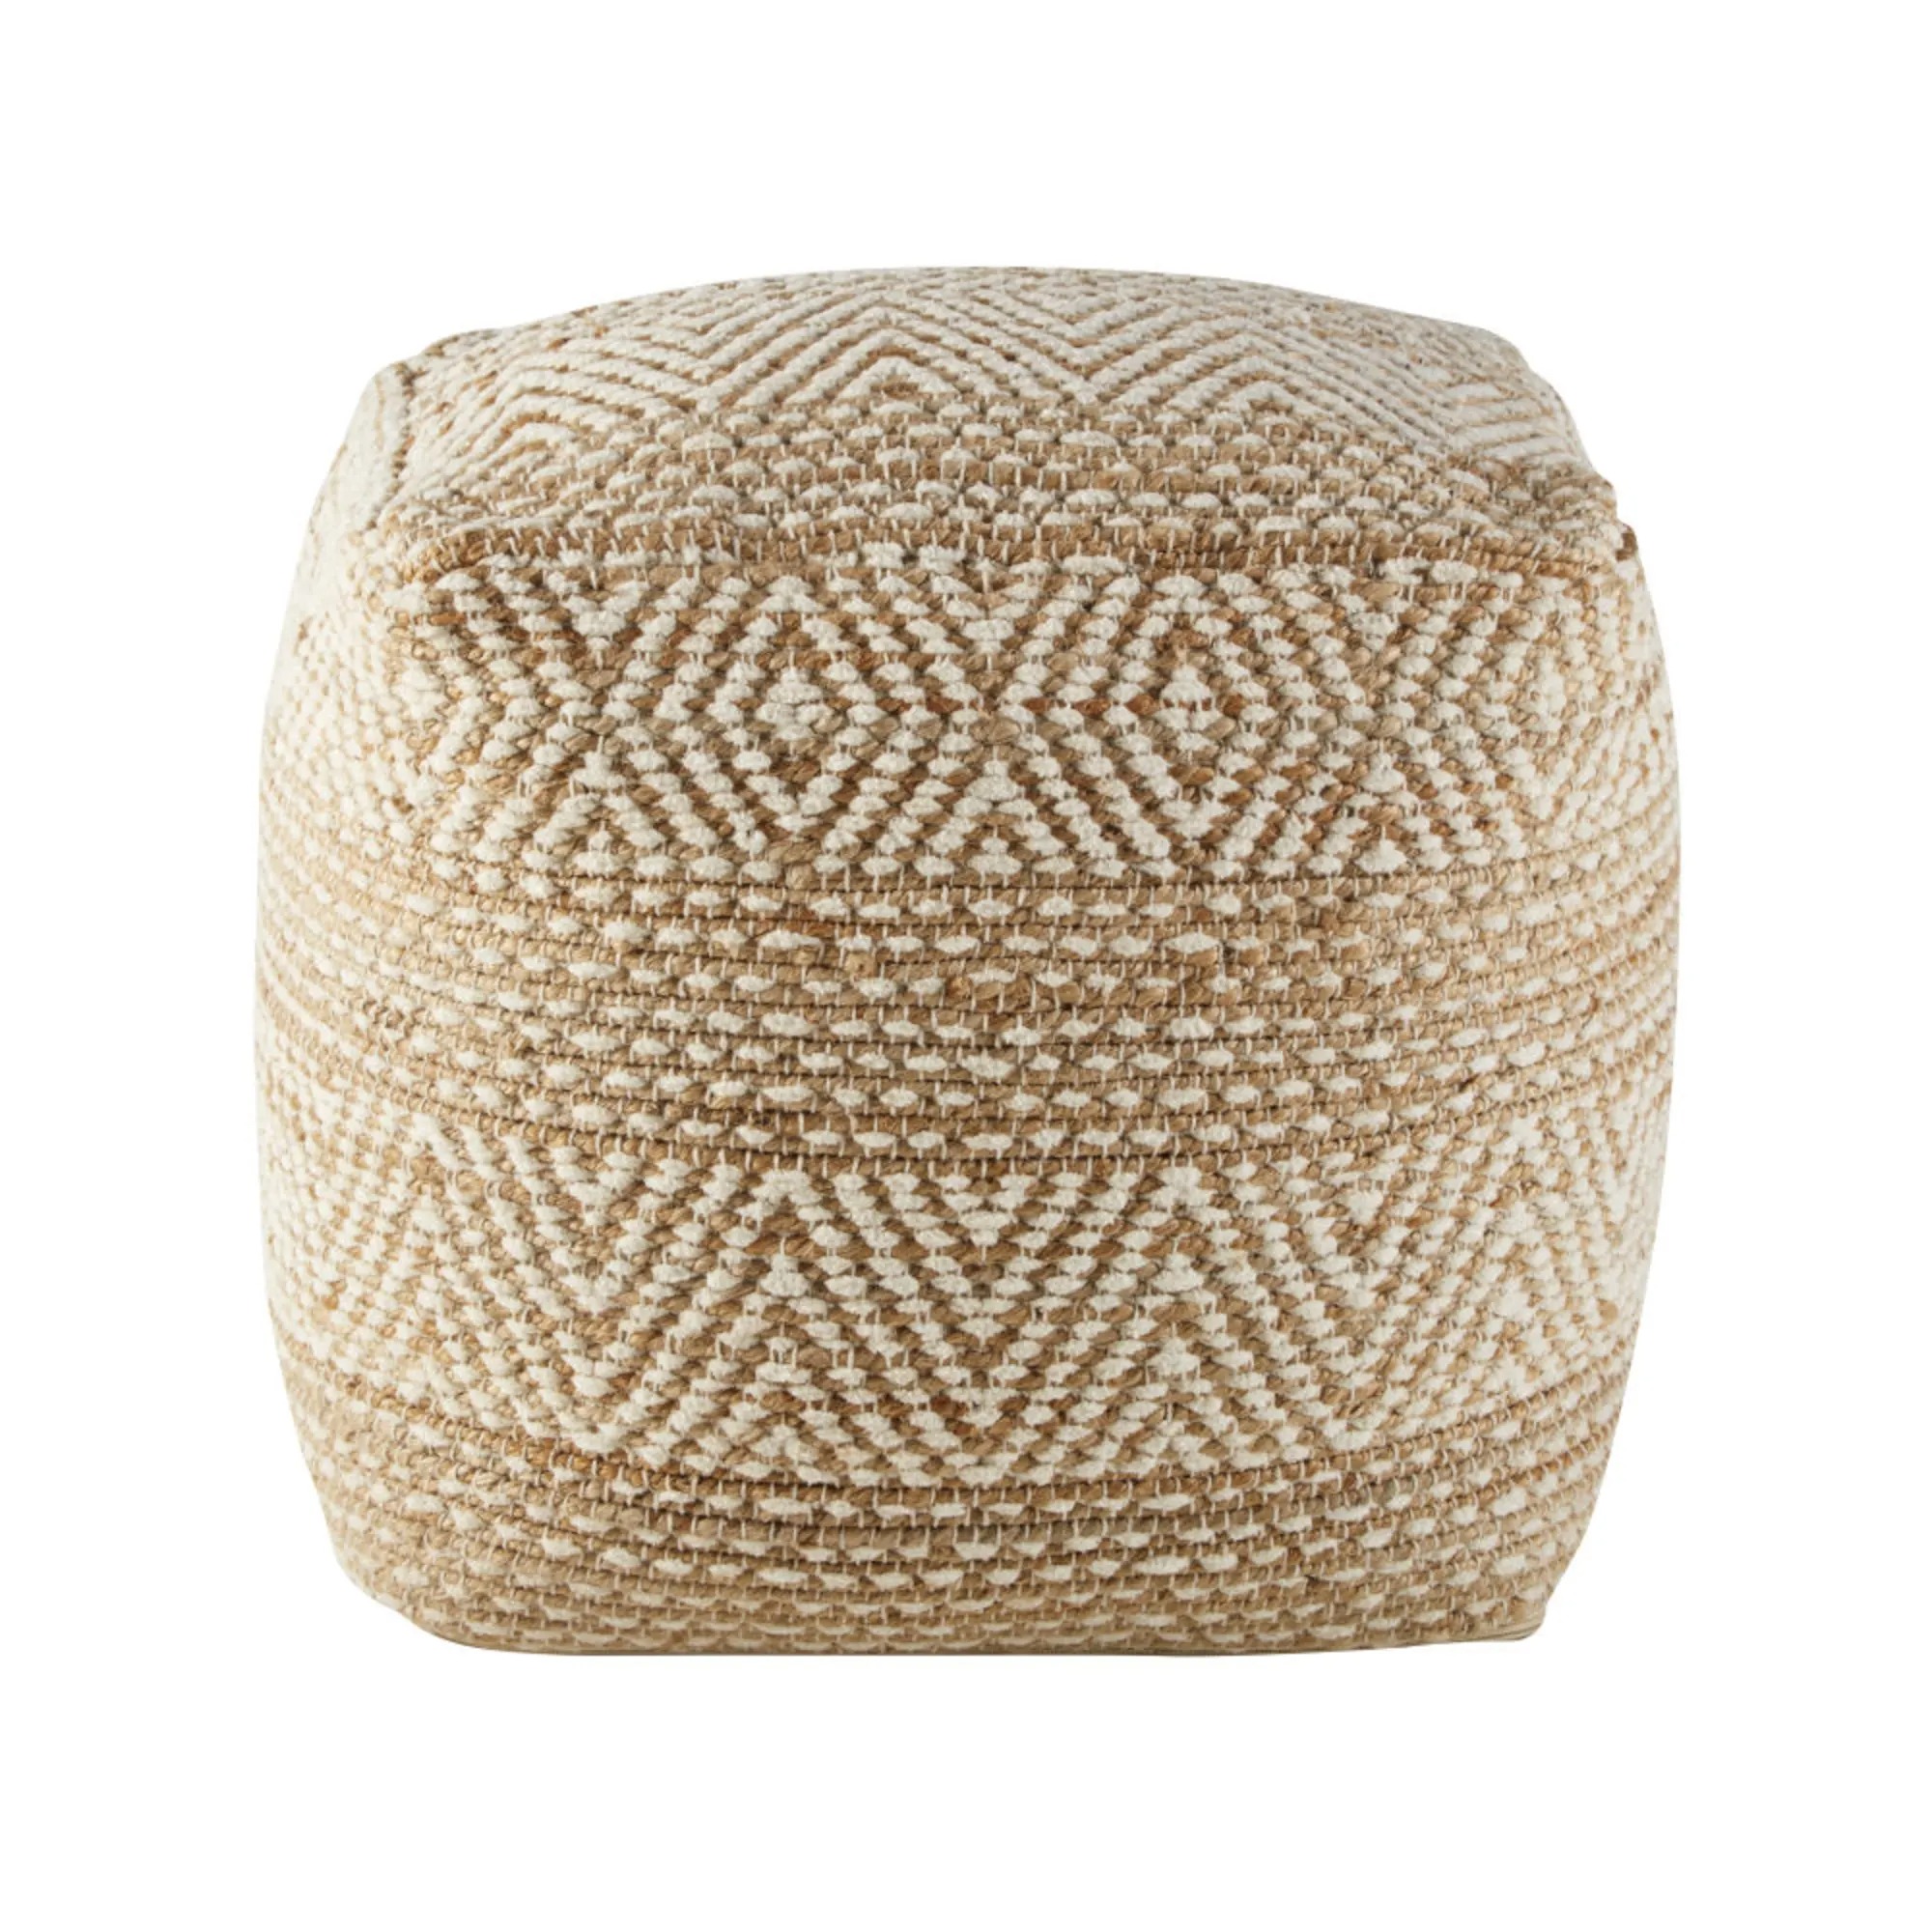 SINBAD.- Beige and white jute and cotton pouf with graphic motifs